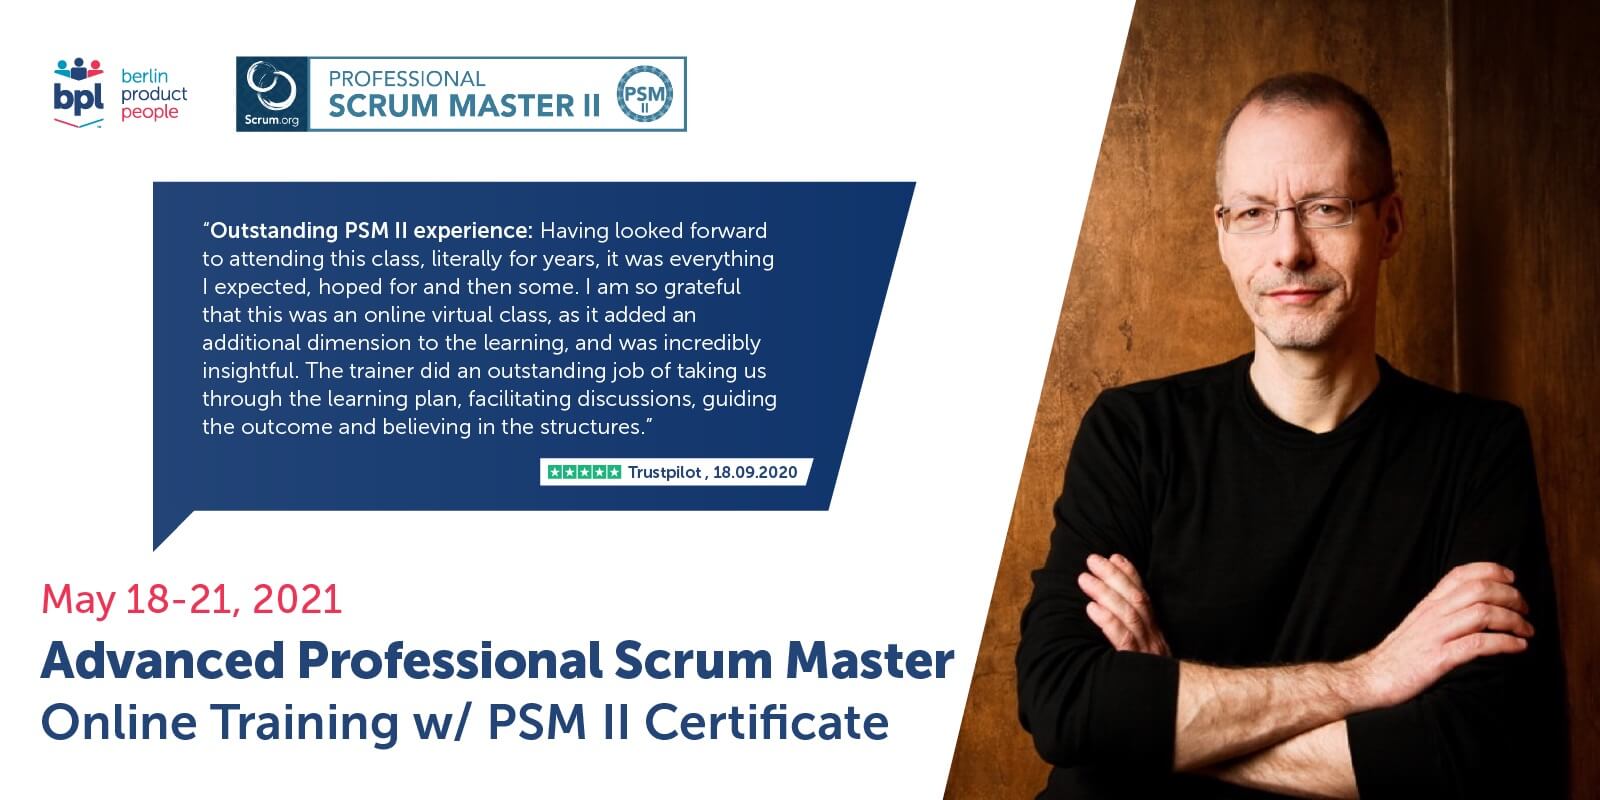 Book Your Seat in the Advanced Scrum Master Training (PSM II) from May 18-21, 2021 — Berlin Product People GmbH